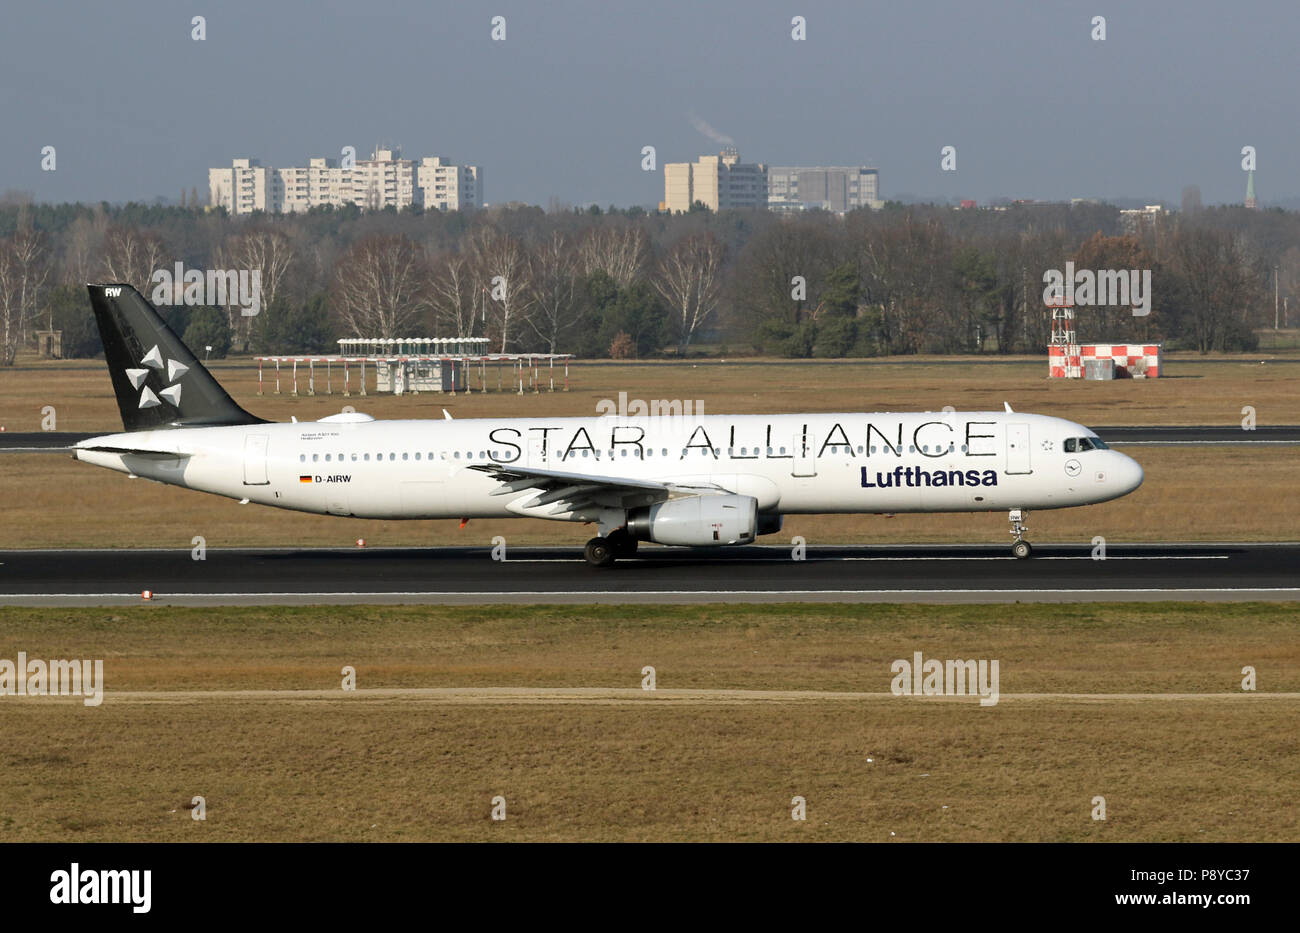 Berlin, Germany, Airbus A321 of the airline Lufthansa Star Alliance on the runway of the airport Berlin-Tegel Stock Photo